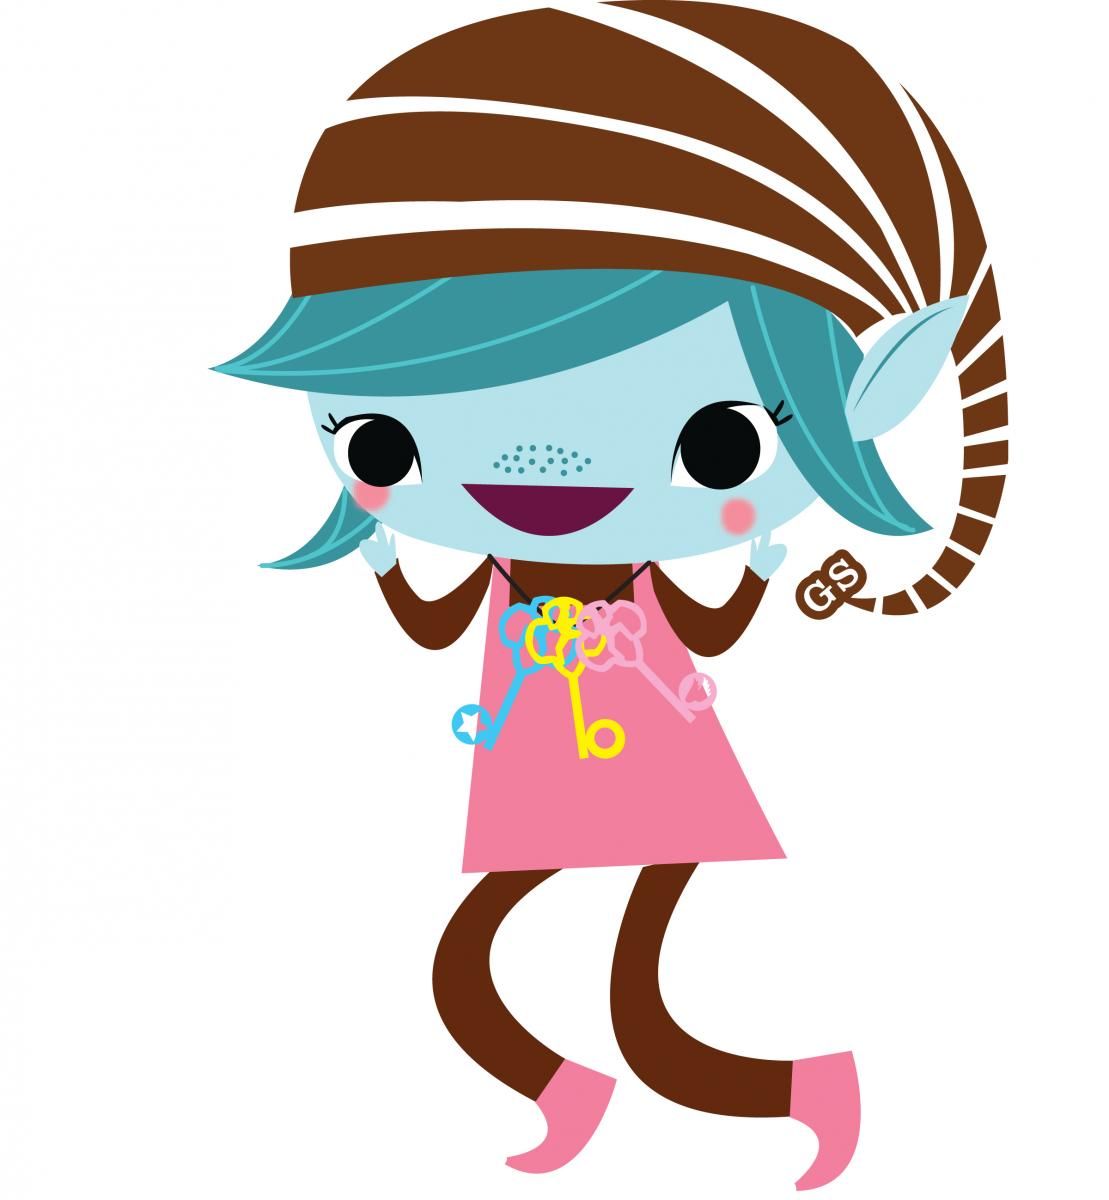 brownie clipart brownie girl scout